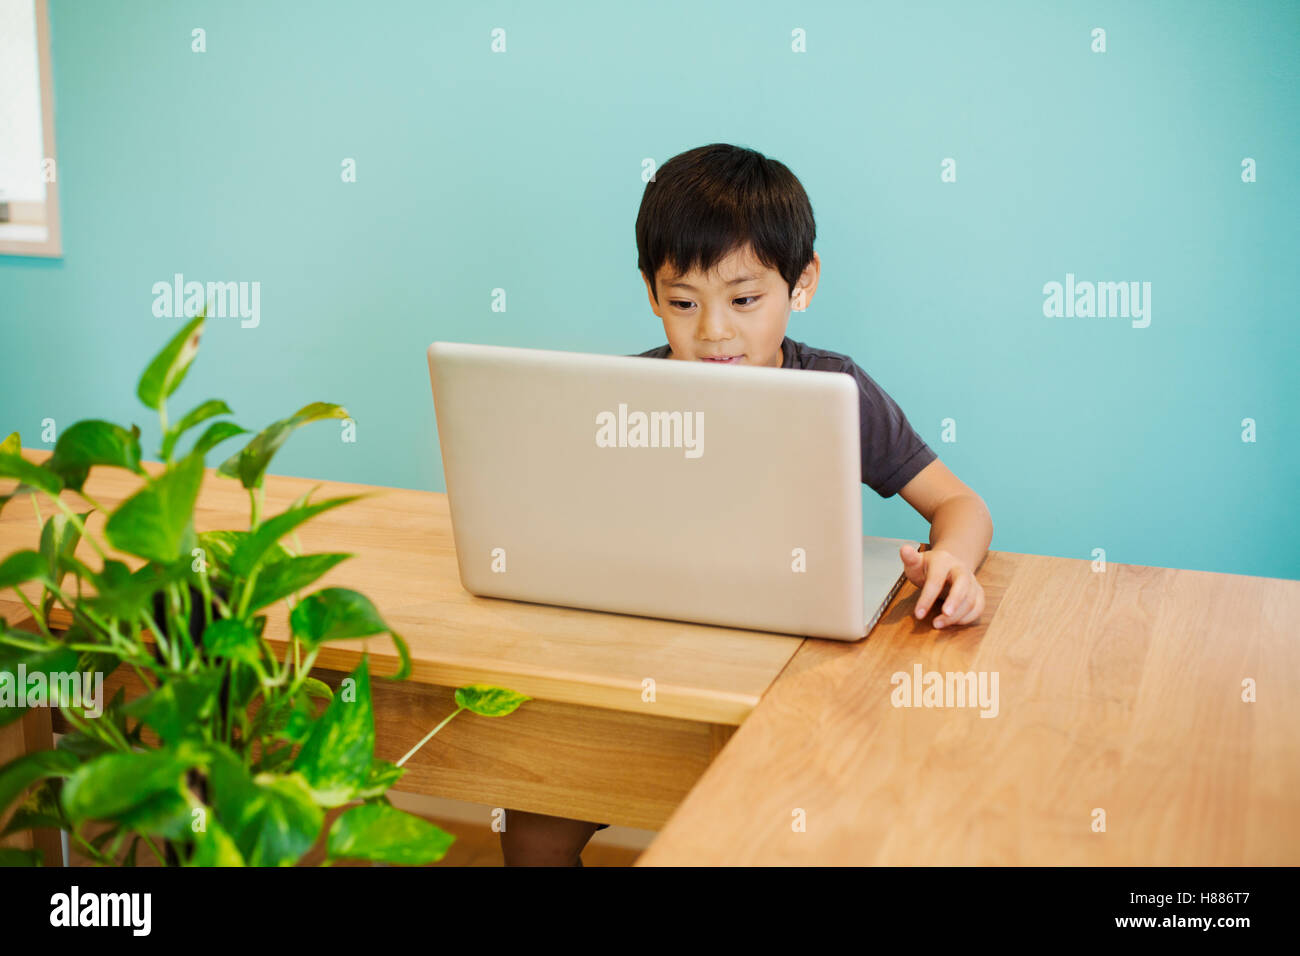 A boy using a computer in a classroom. Stock Photo